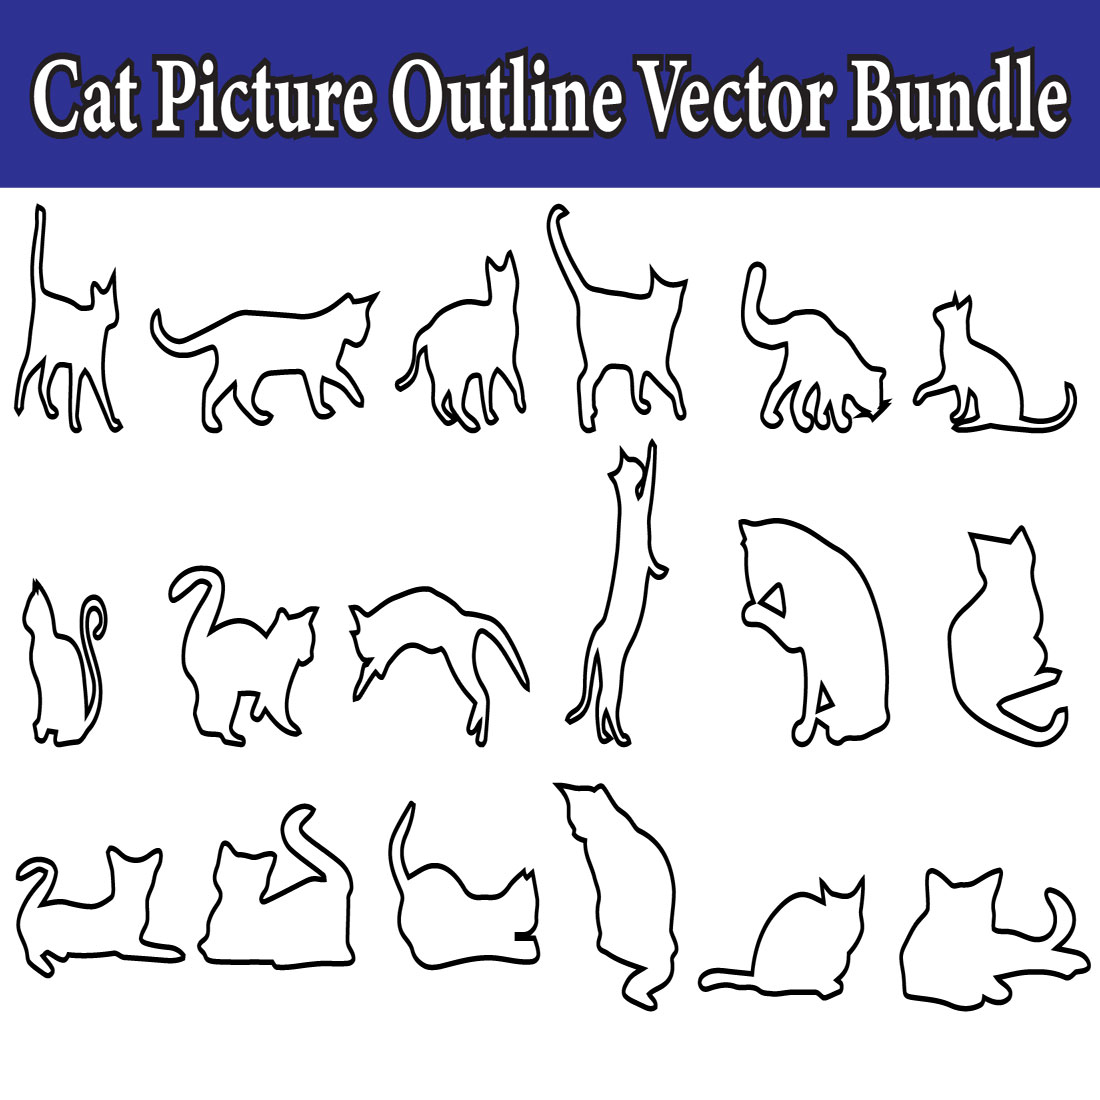 Cat Picture Outline Vector Bundle preview image.